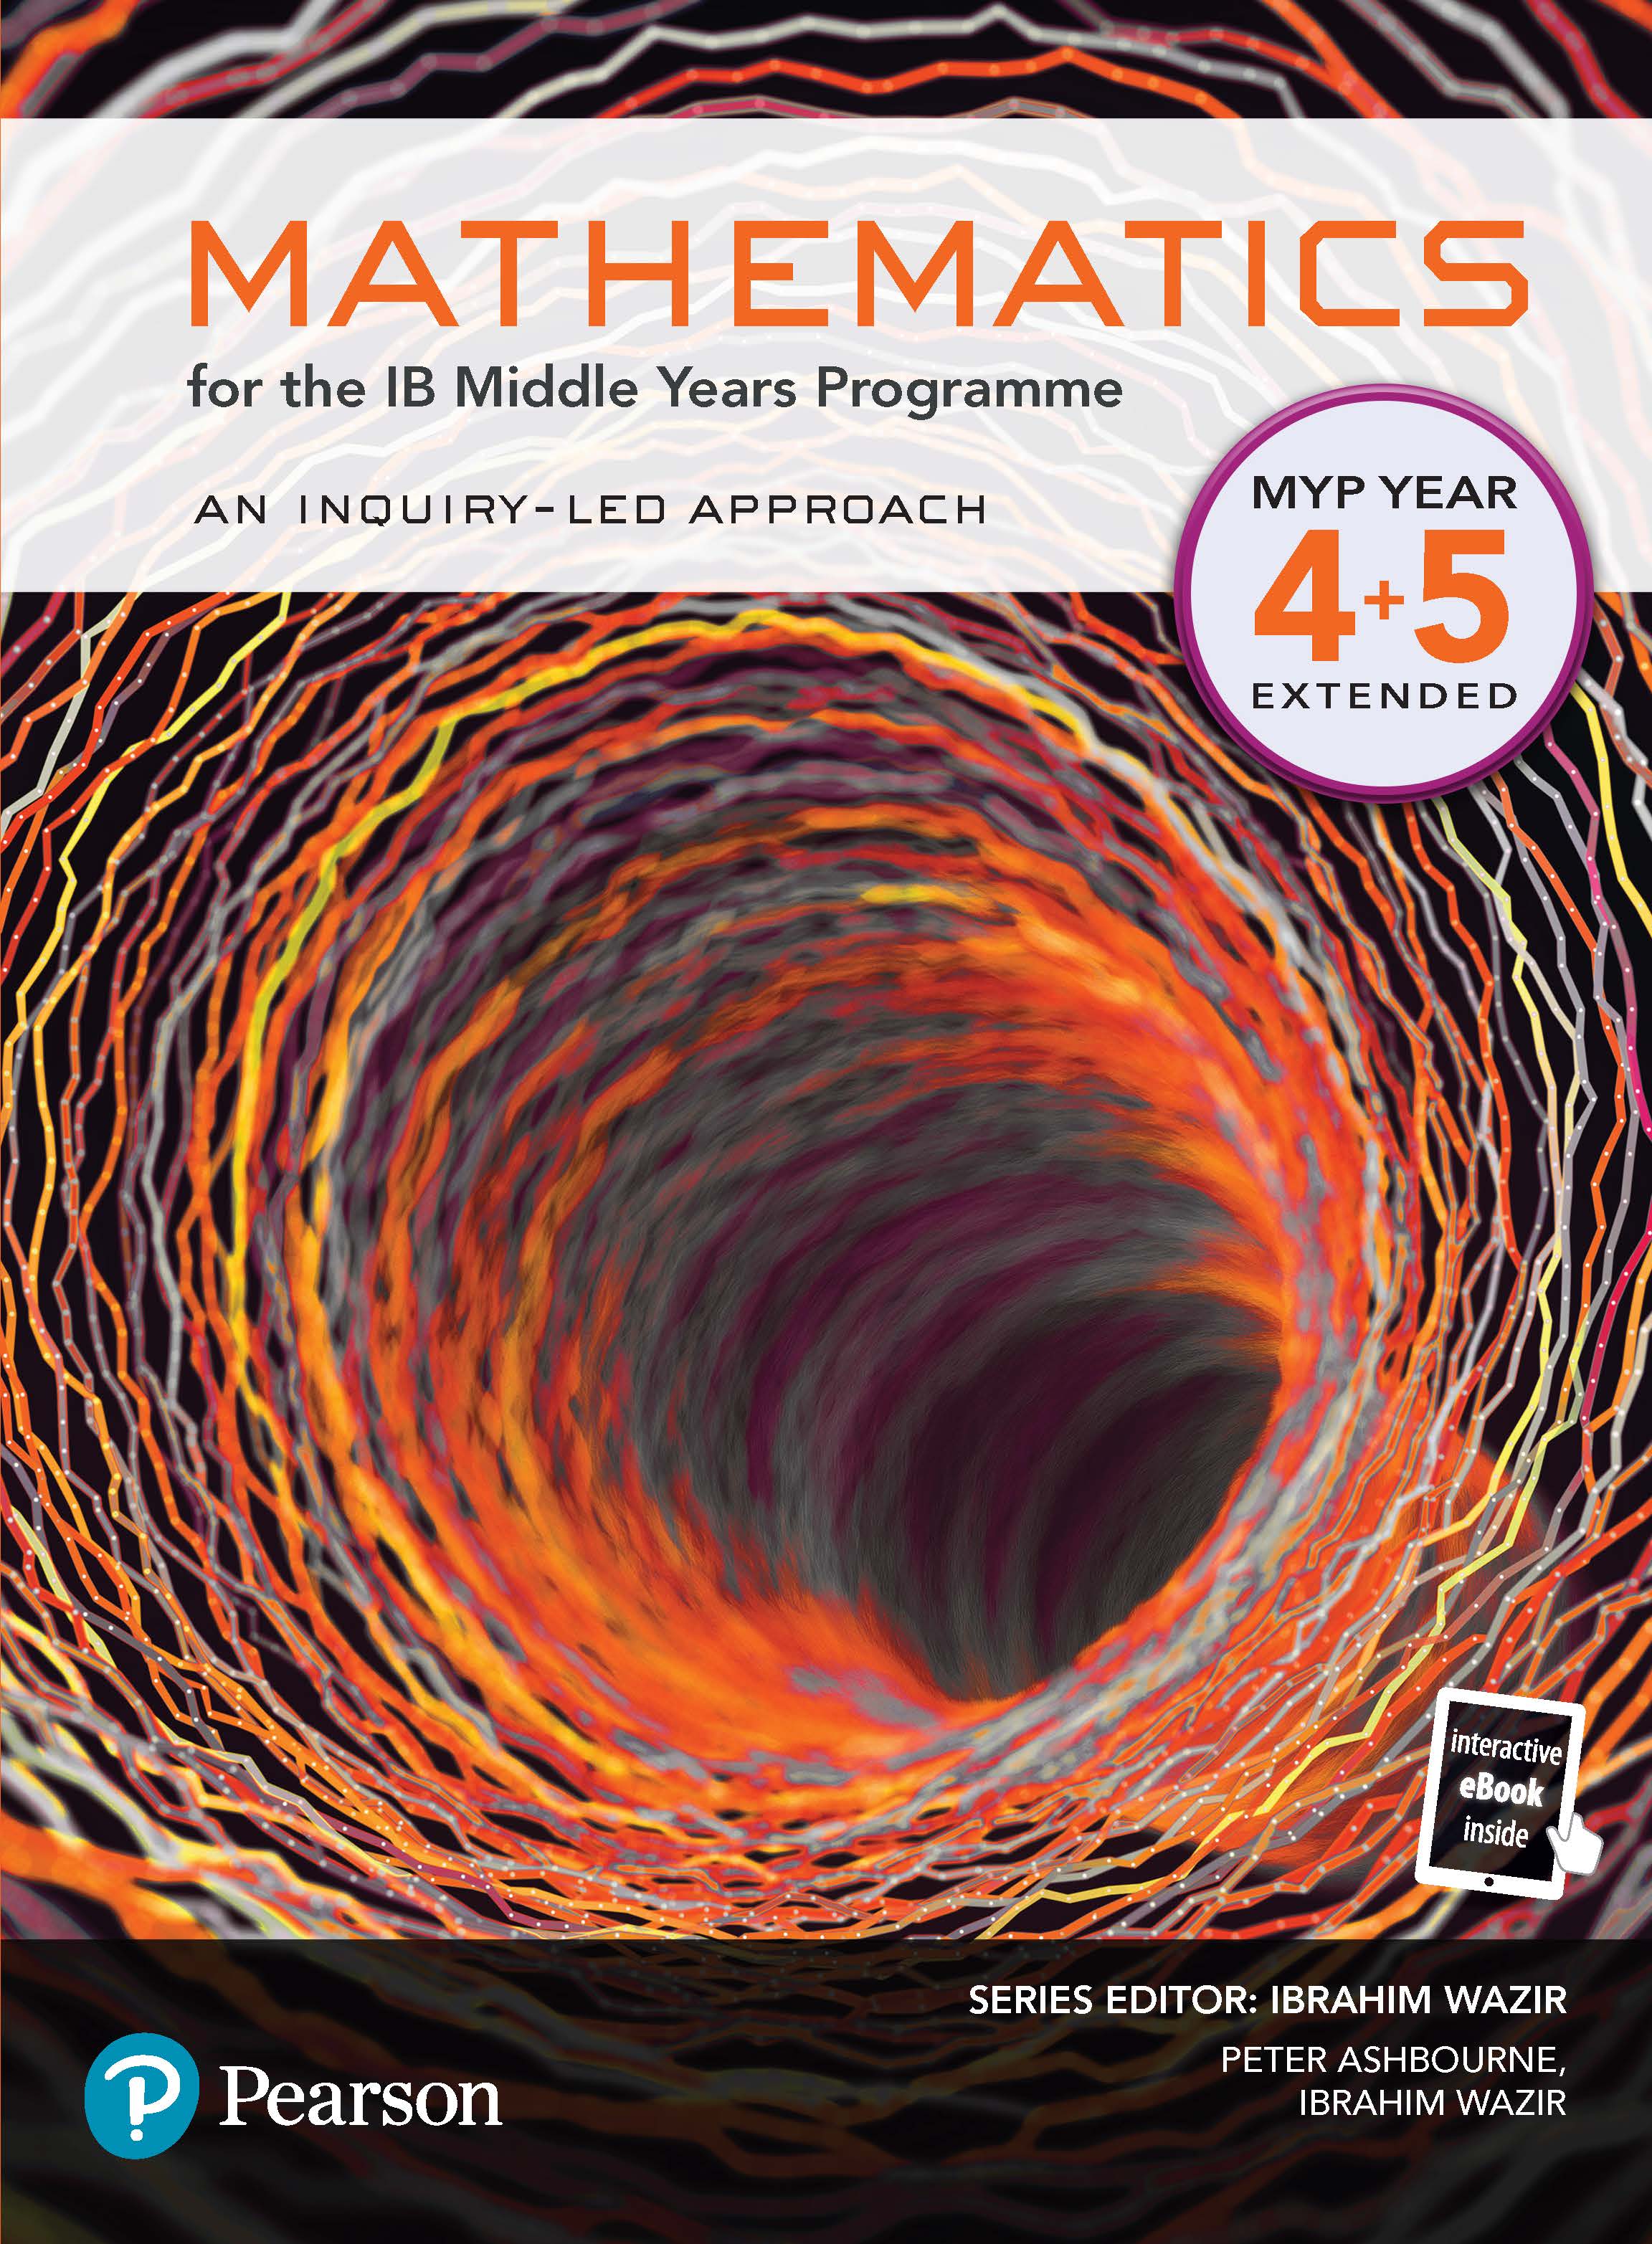 Pearson Mathematics for the IB Middle Years Programme Year 4+5 Extended (Print + eBook Pack)- By Ibrahim Vazir